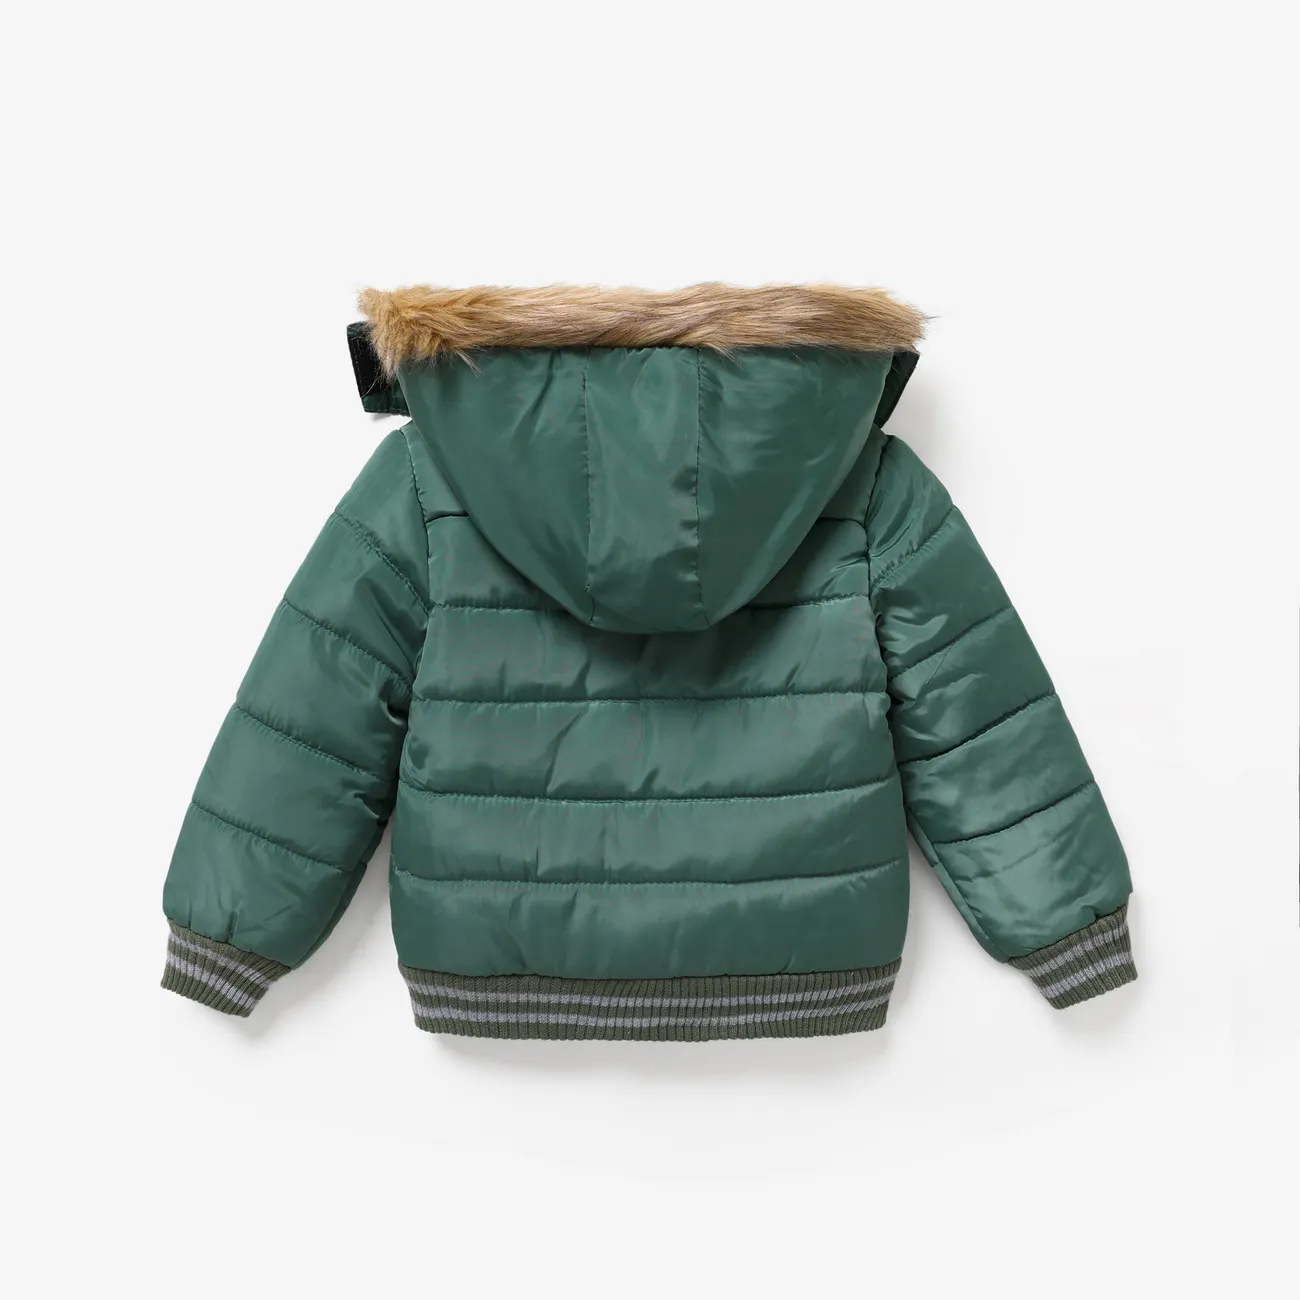 Toddler/Kid Boys Sporty Solid color/Camouflage Big Fuzzy Hooded Cotton Jacket Emerald big image 1